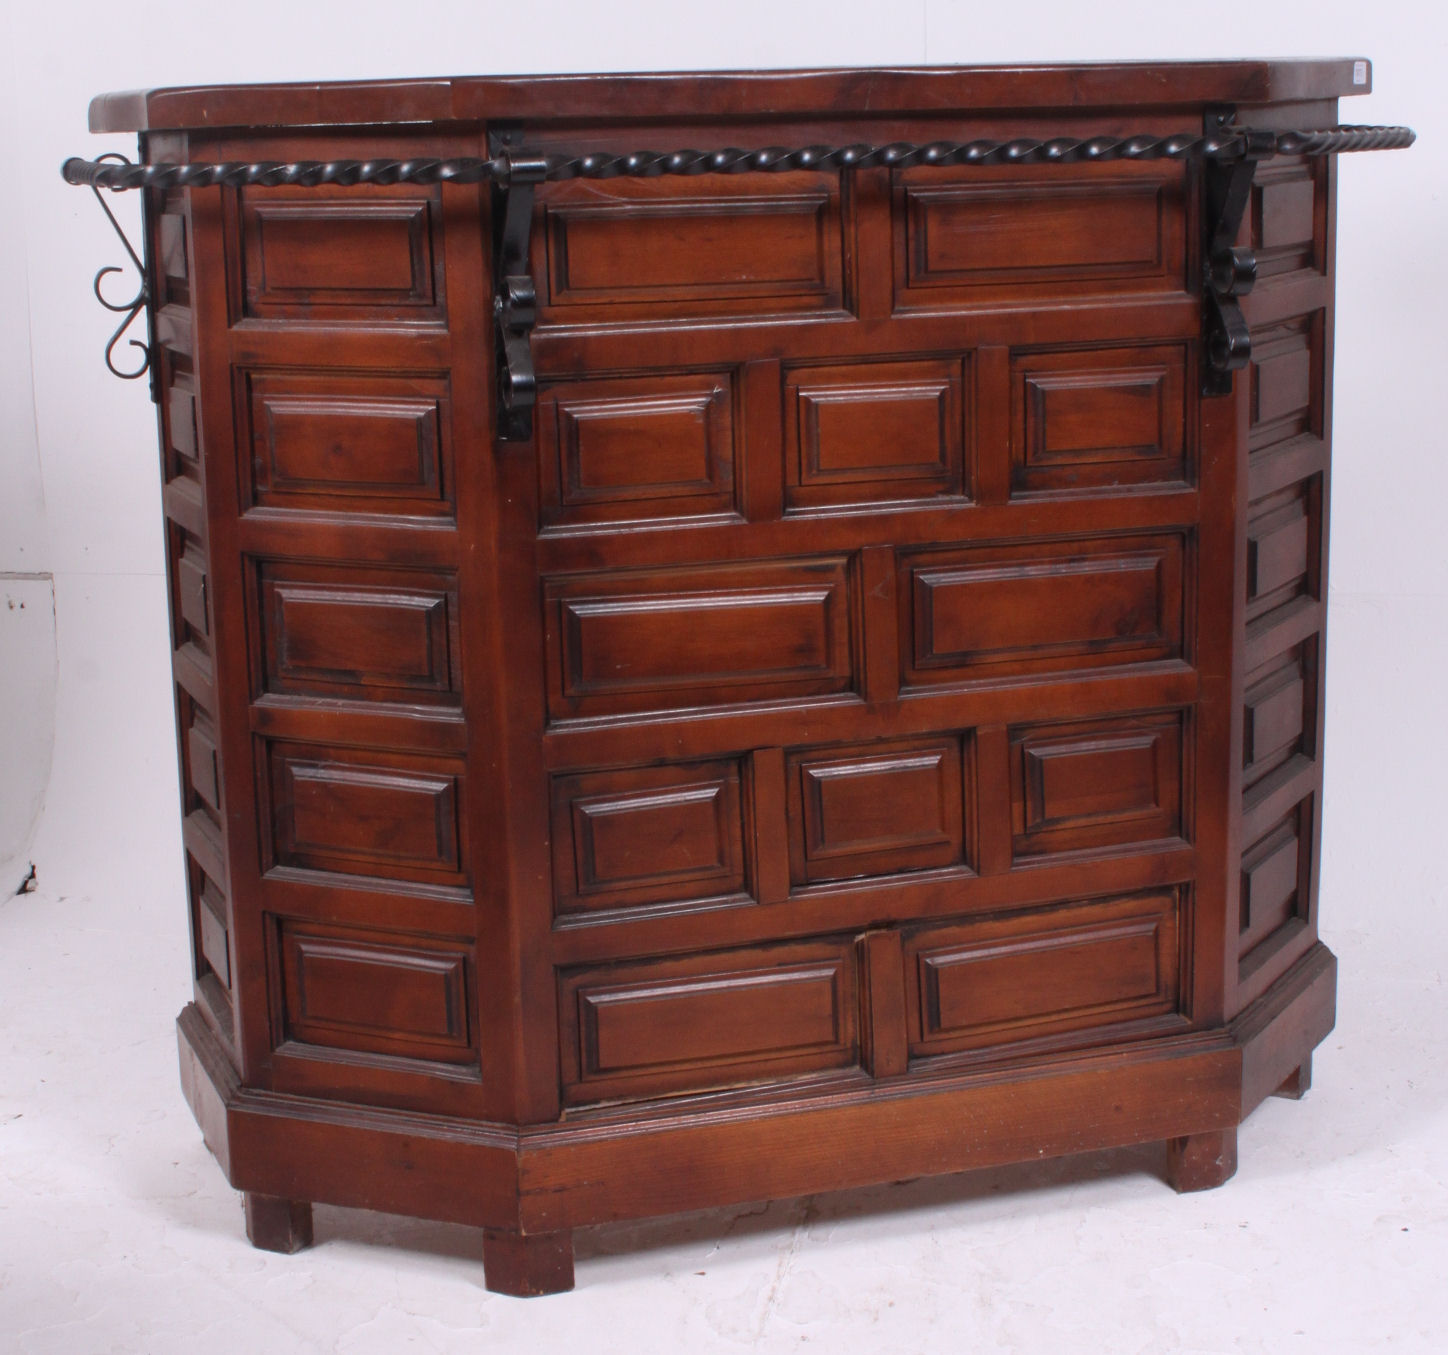 A vintage oak 1970's colonial style drinks bar / cocktail bar having geometric panelled front with